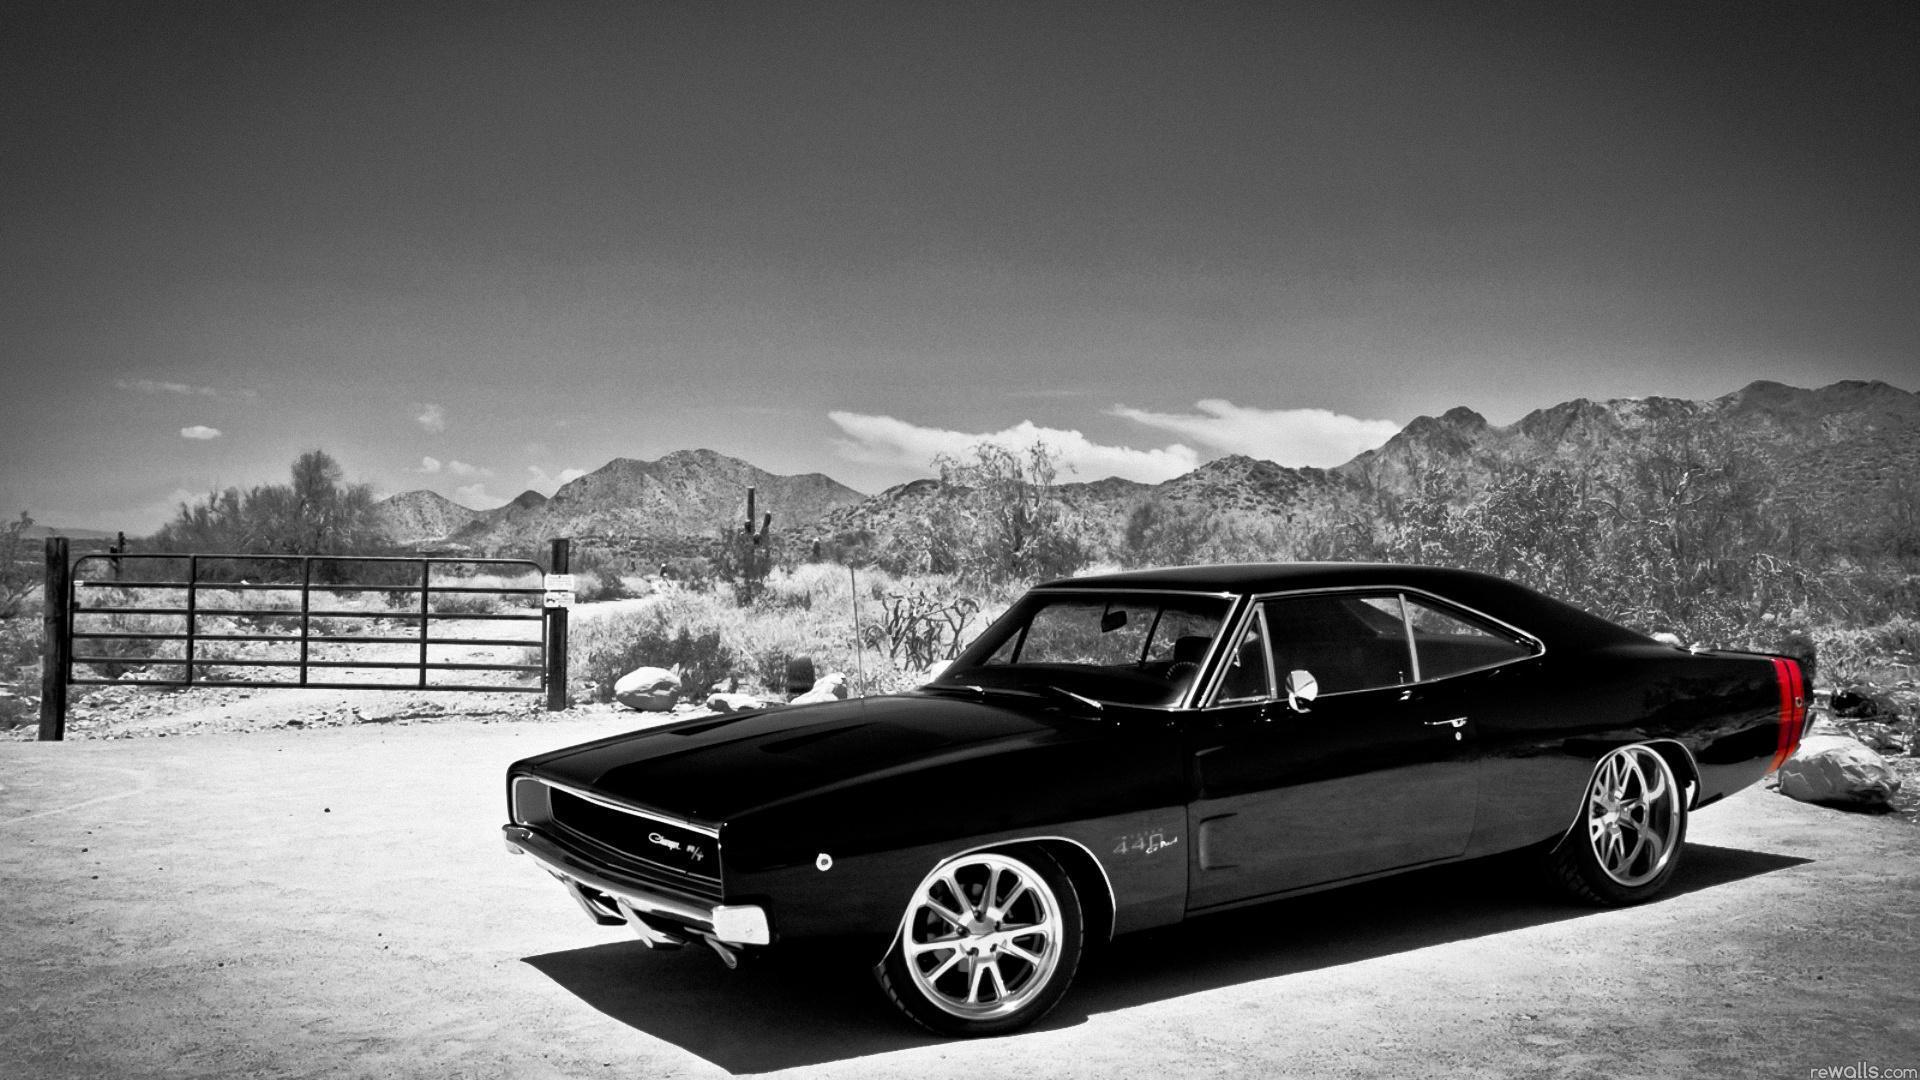 Classic Muscle Car Wallpaper For Phone